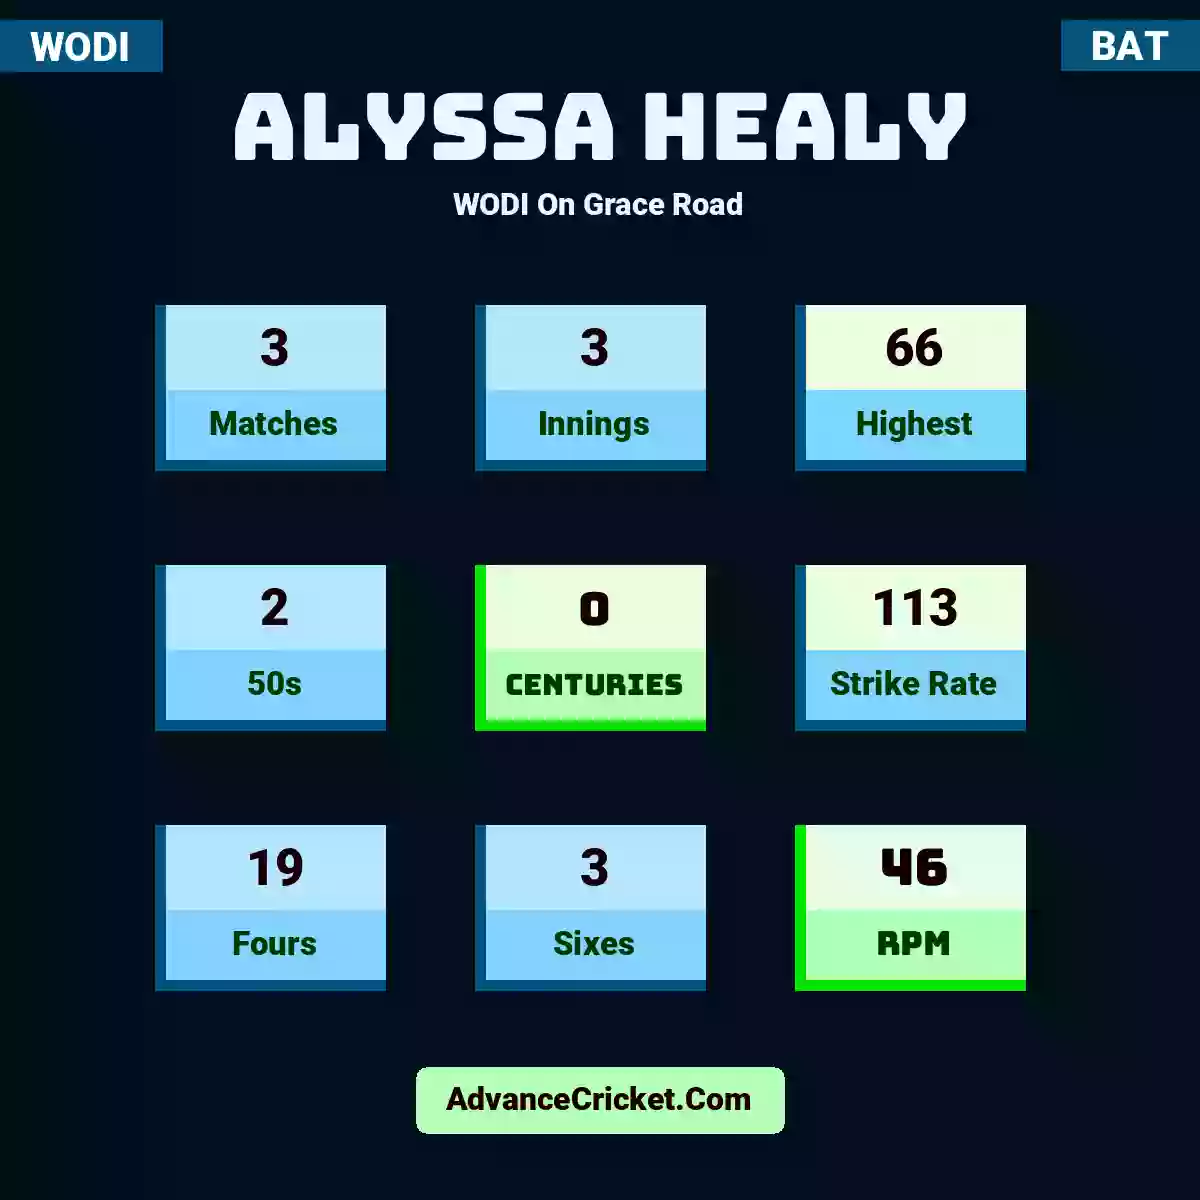 Alyssa Healy WODI  On Grace Road, Alyssa Healy played 3 matches, scored 66 runs as highest, 2 half-centuries, and 0 centuries, with a strike rate of 113. A.Healy hit 19 fours and 3 sixes, with an RPM of 46.